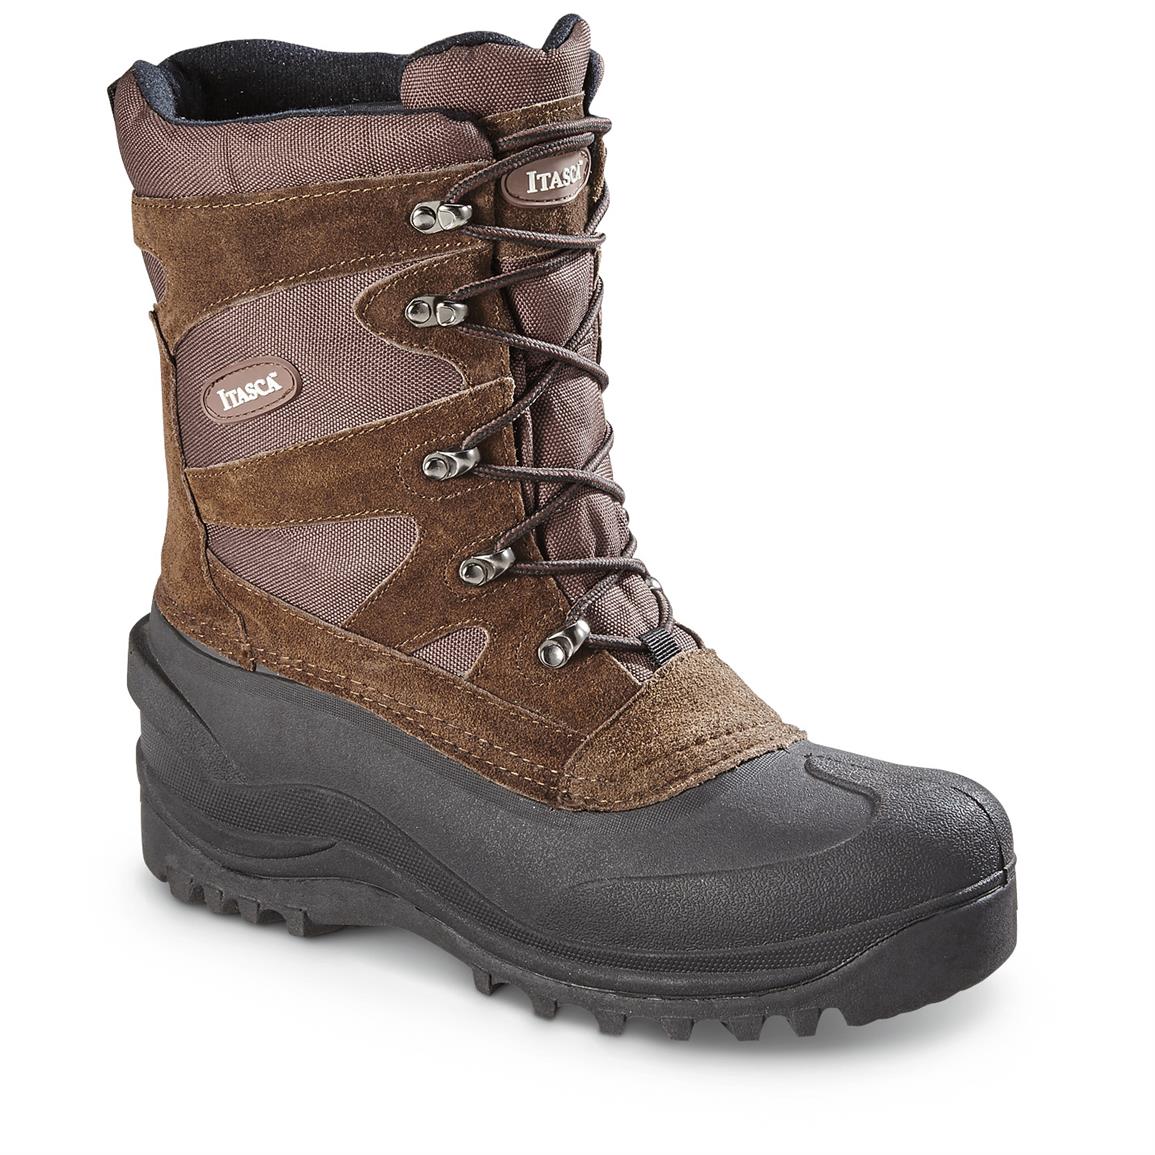 Itasca Men's Ketchikan Boots - 648655, Winter & Snow Boots at Sportsman ...